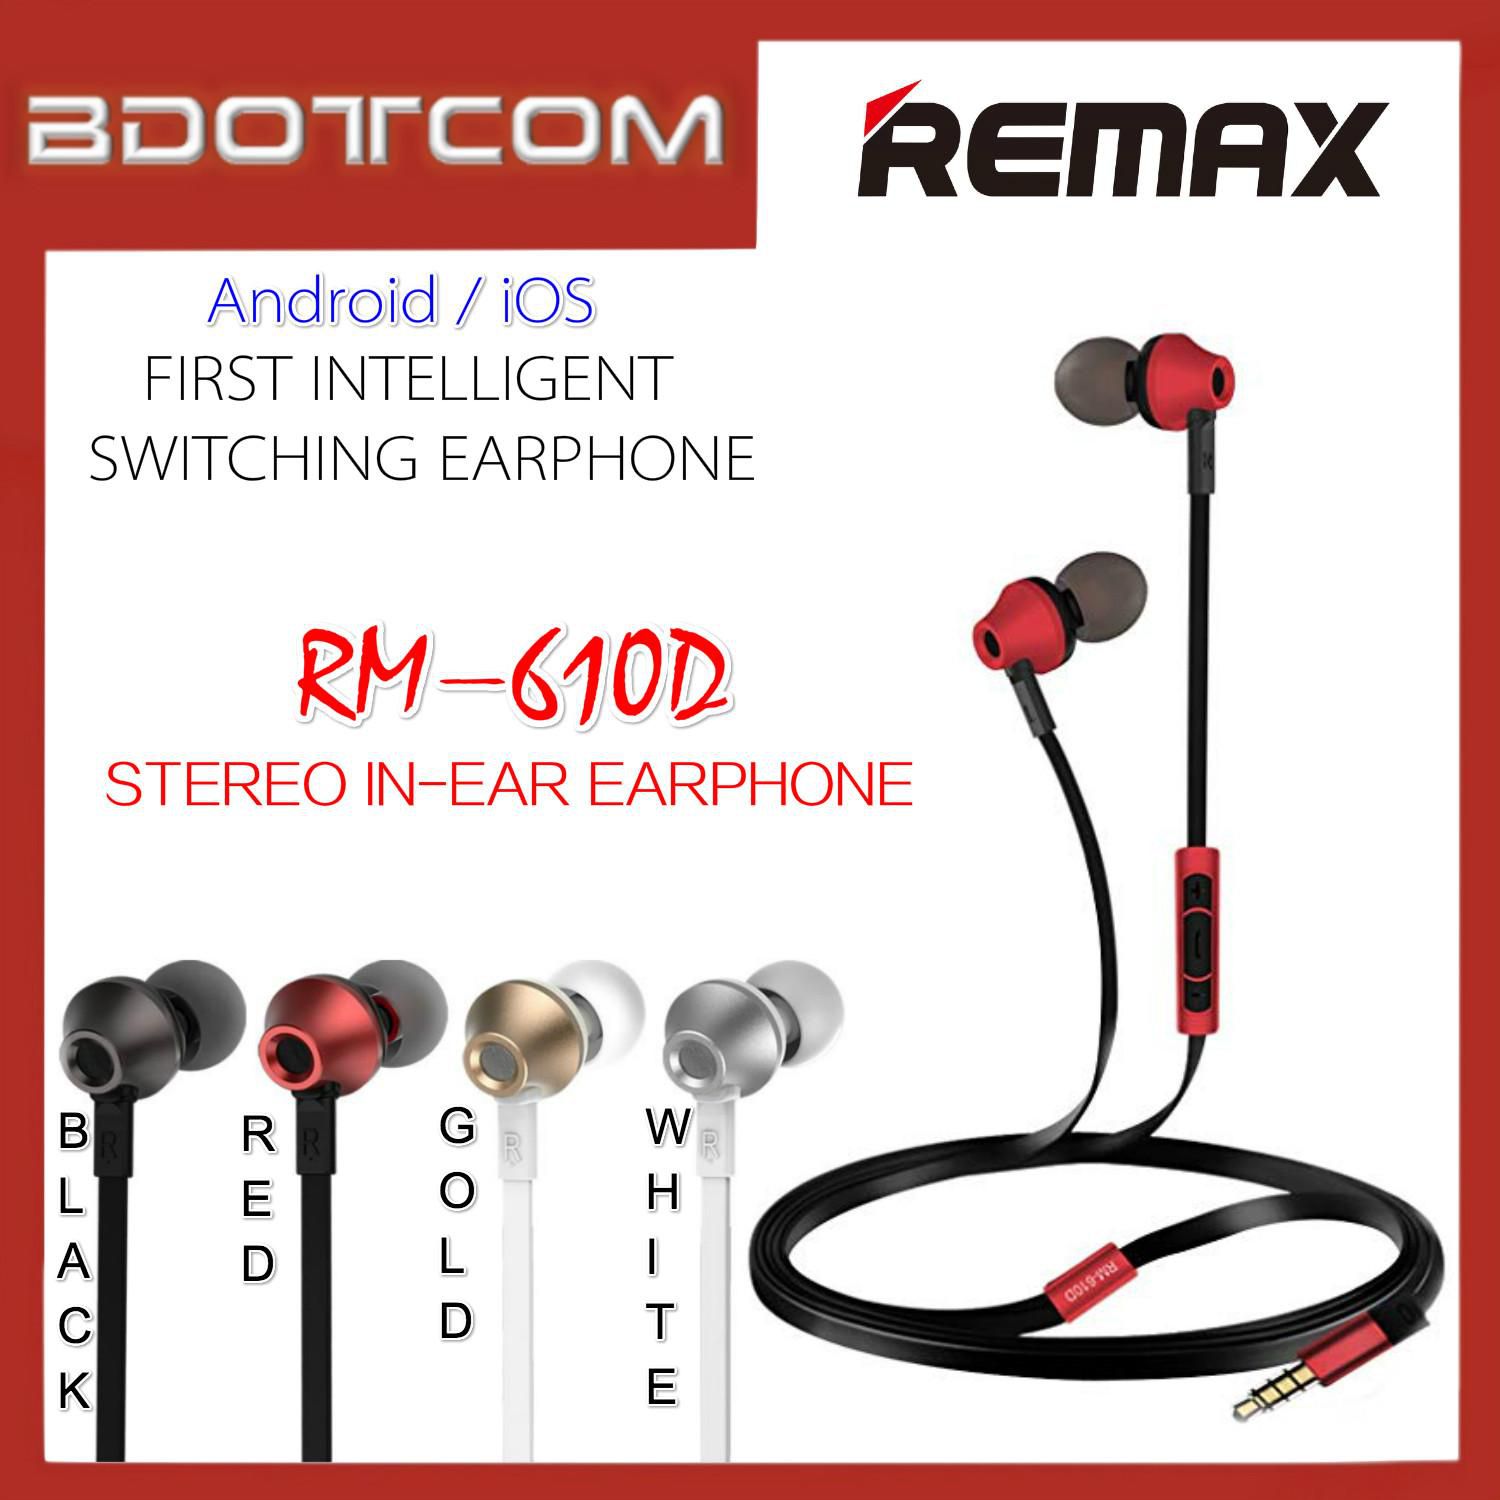 Remax 610D RM-610D In-Ear Stereo Earphone Headphone with Mic